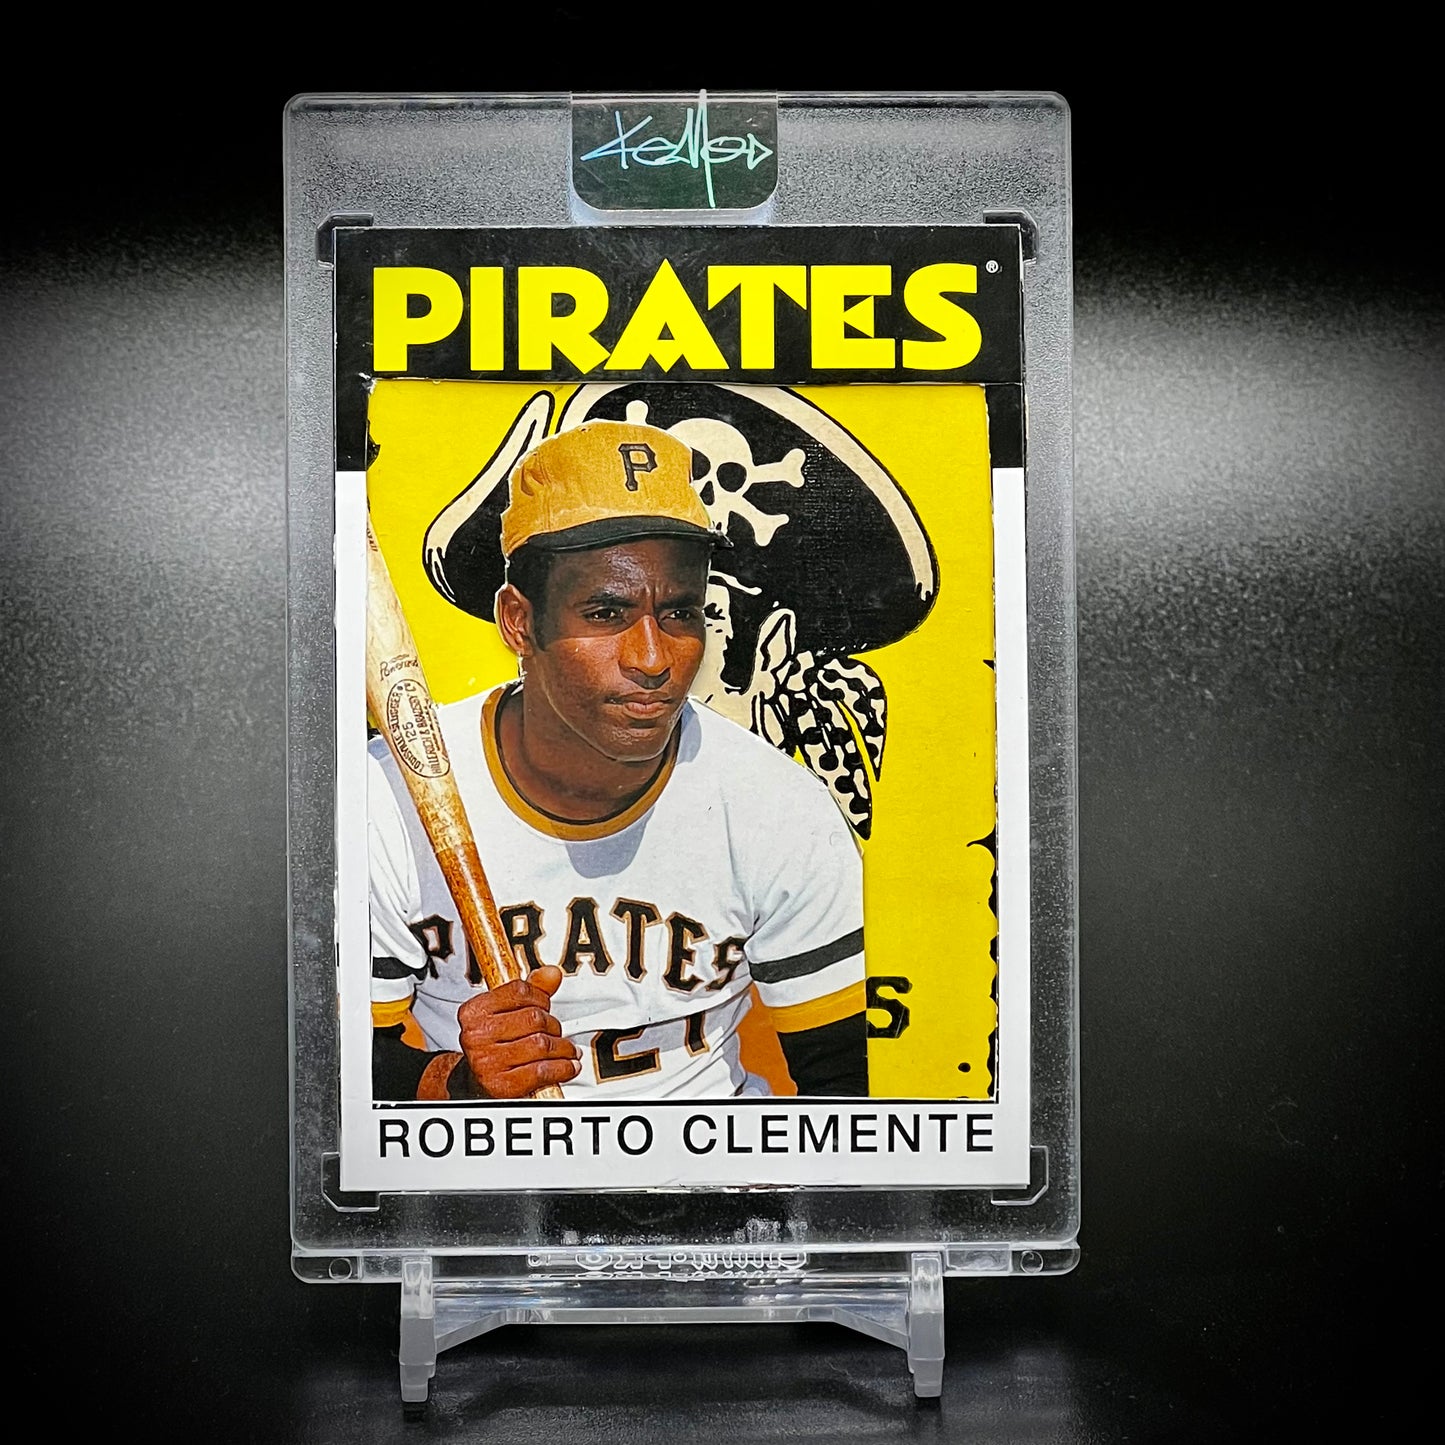 Roberto Clemente “Vintage Pirate” At Card By KEMO